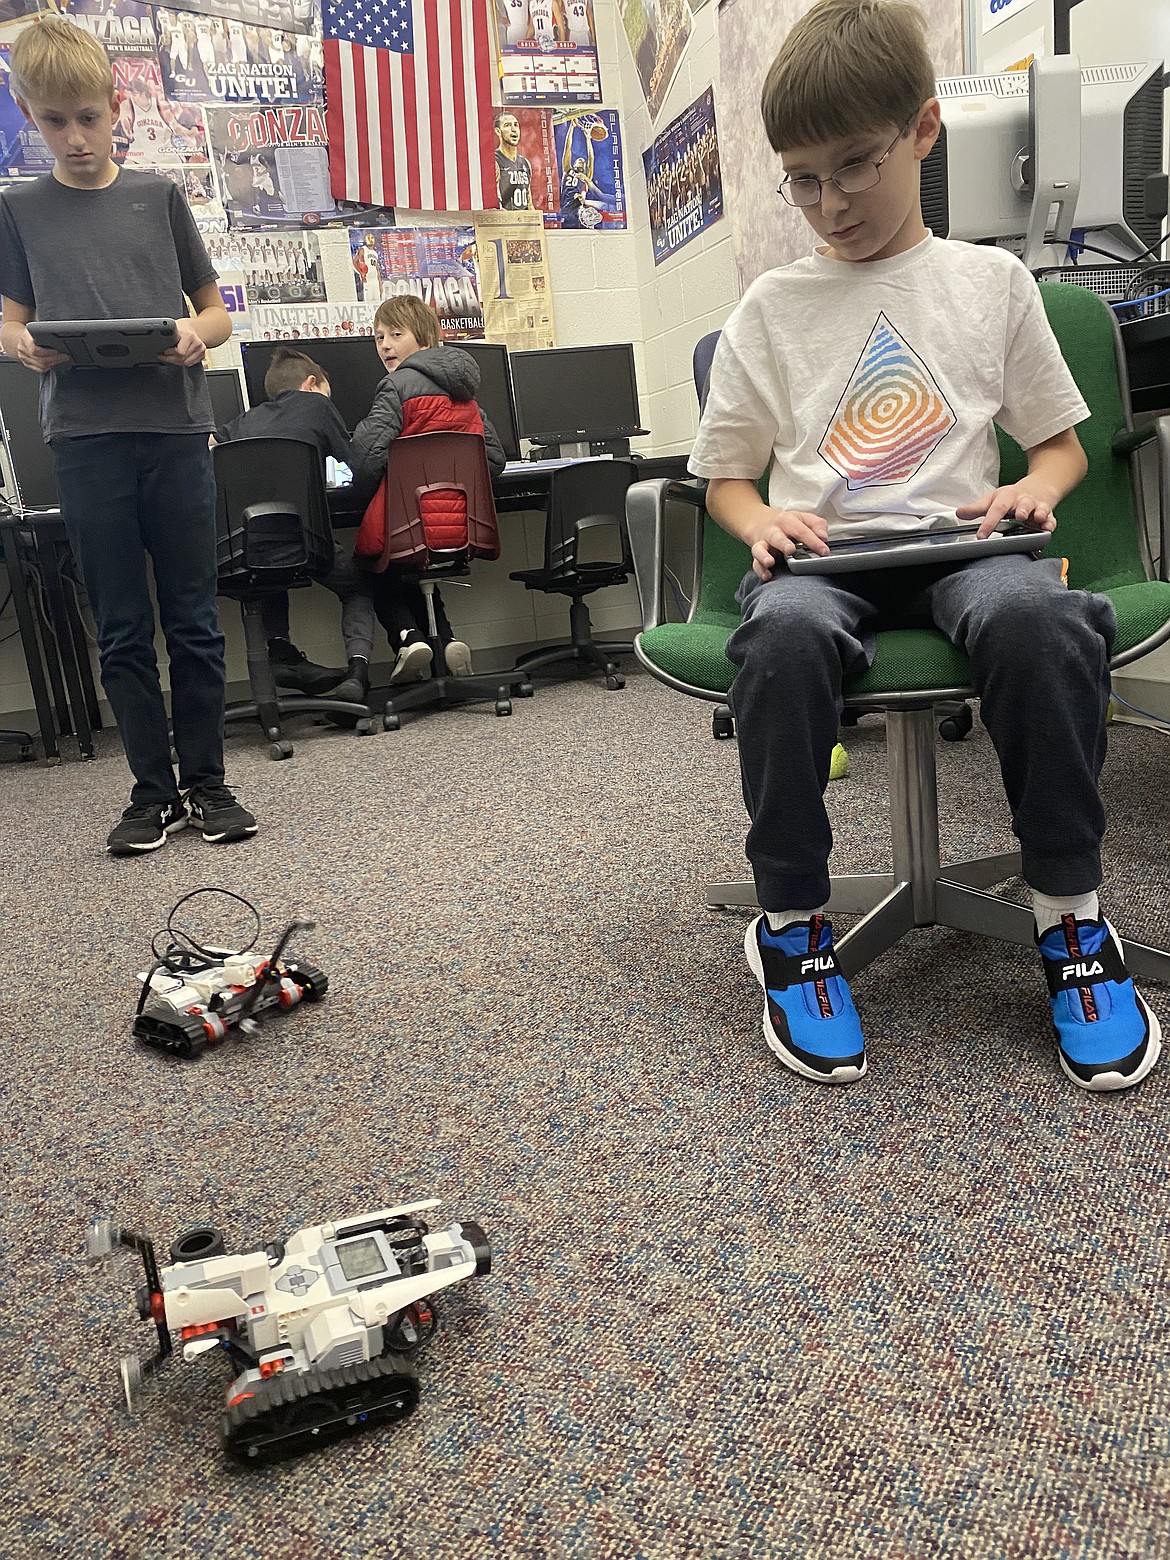 From left: River City Middle School students Jack Robertson, 12, and Seth Harrison, 11, engage in some healthy competition Friday, with their robots which are operated via Bluetooth. Robotics kits were made possible by a Post Falls Education Grant.